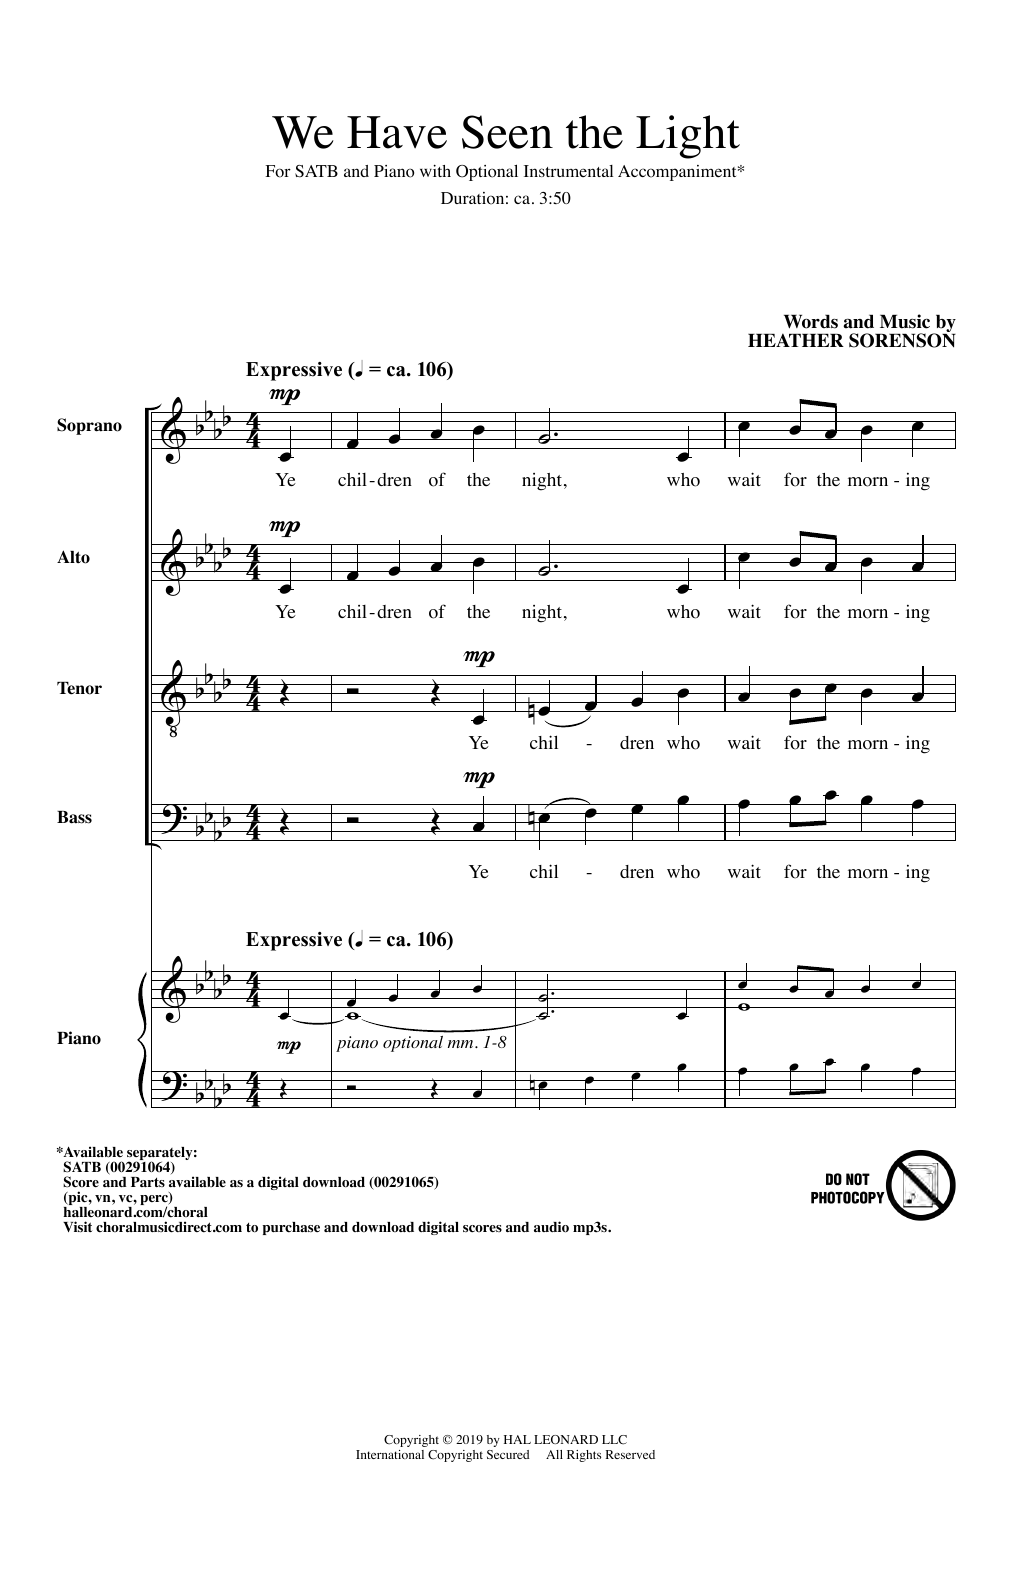 Download Heather Sorenson We Have Seen The Light Sheet Music